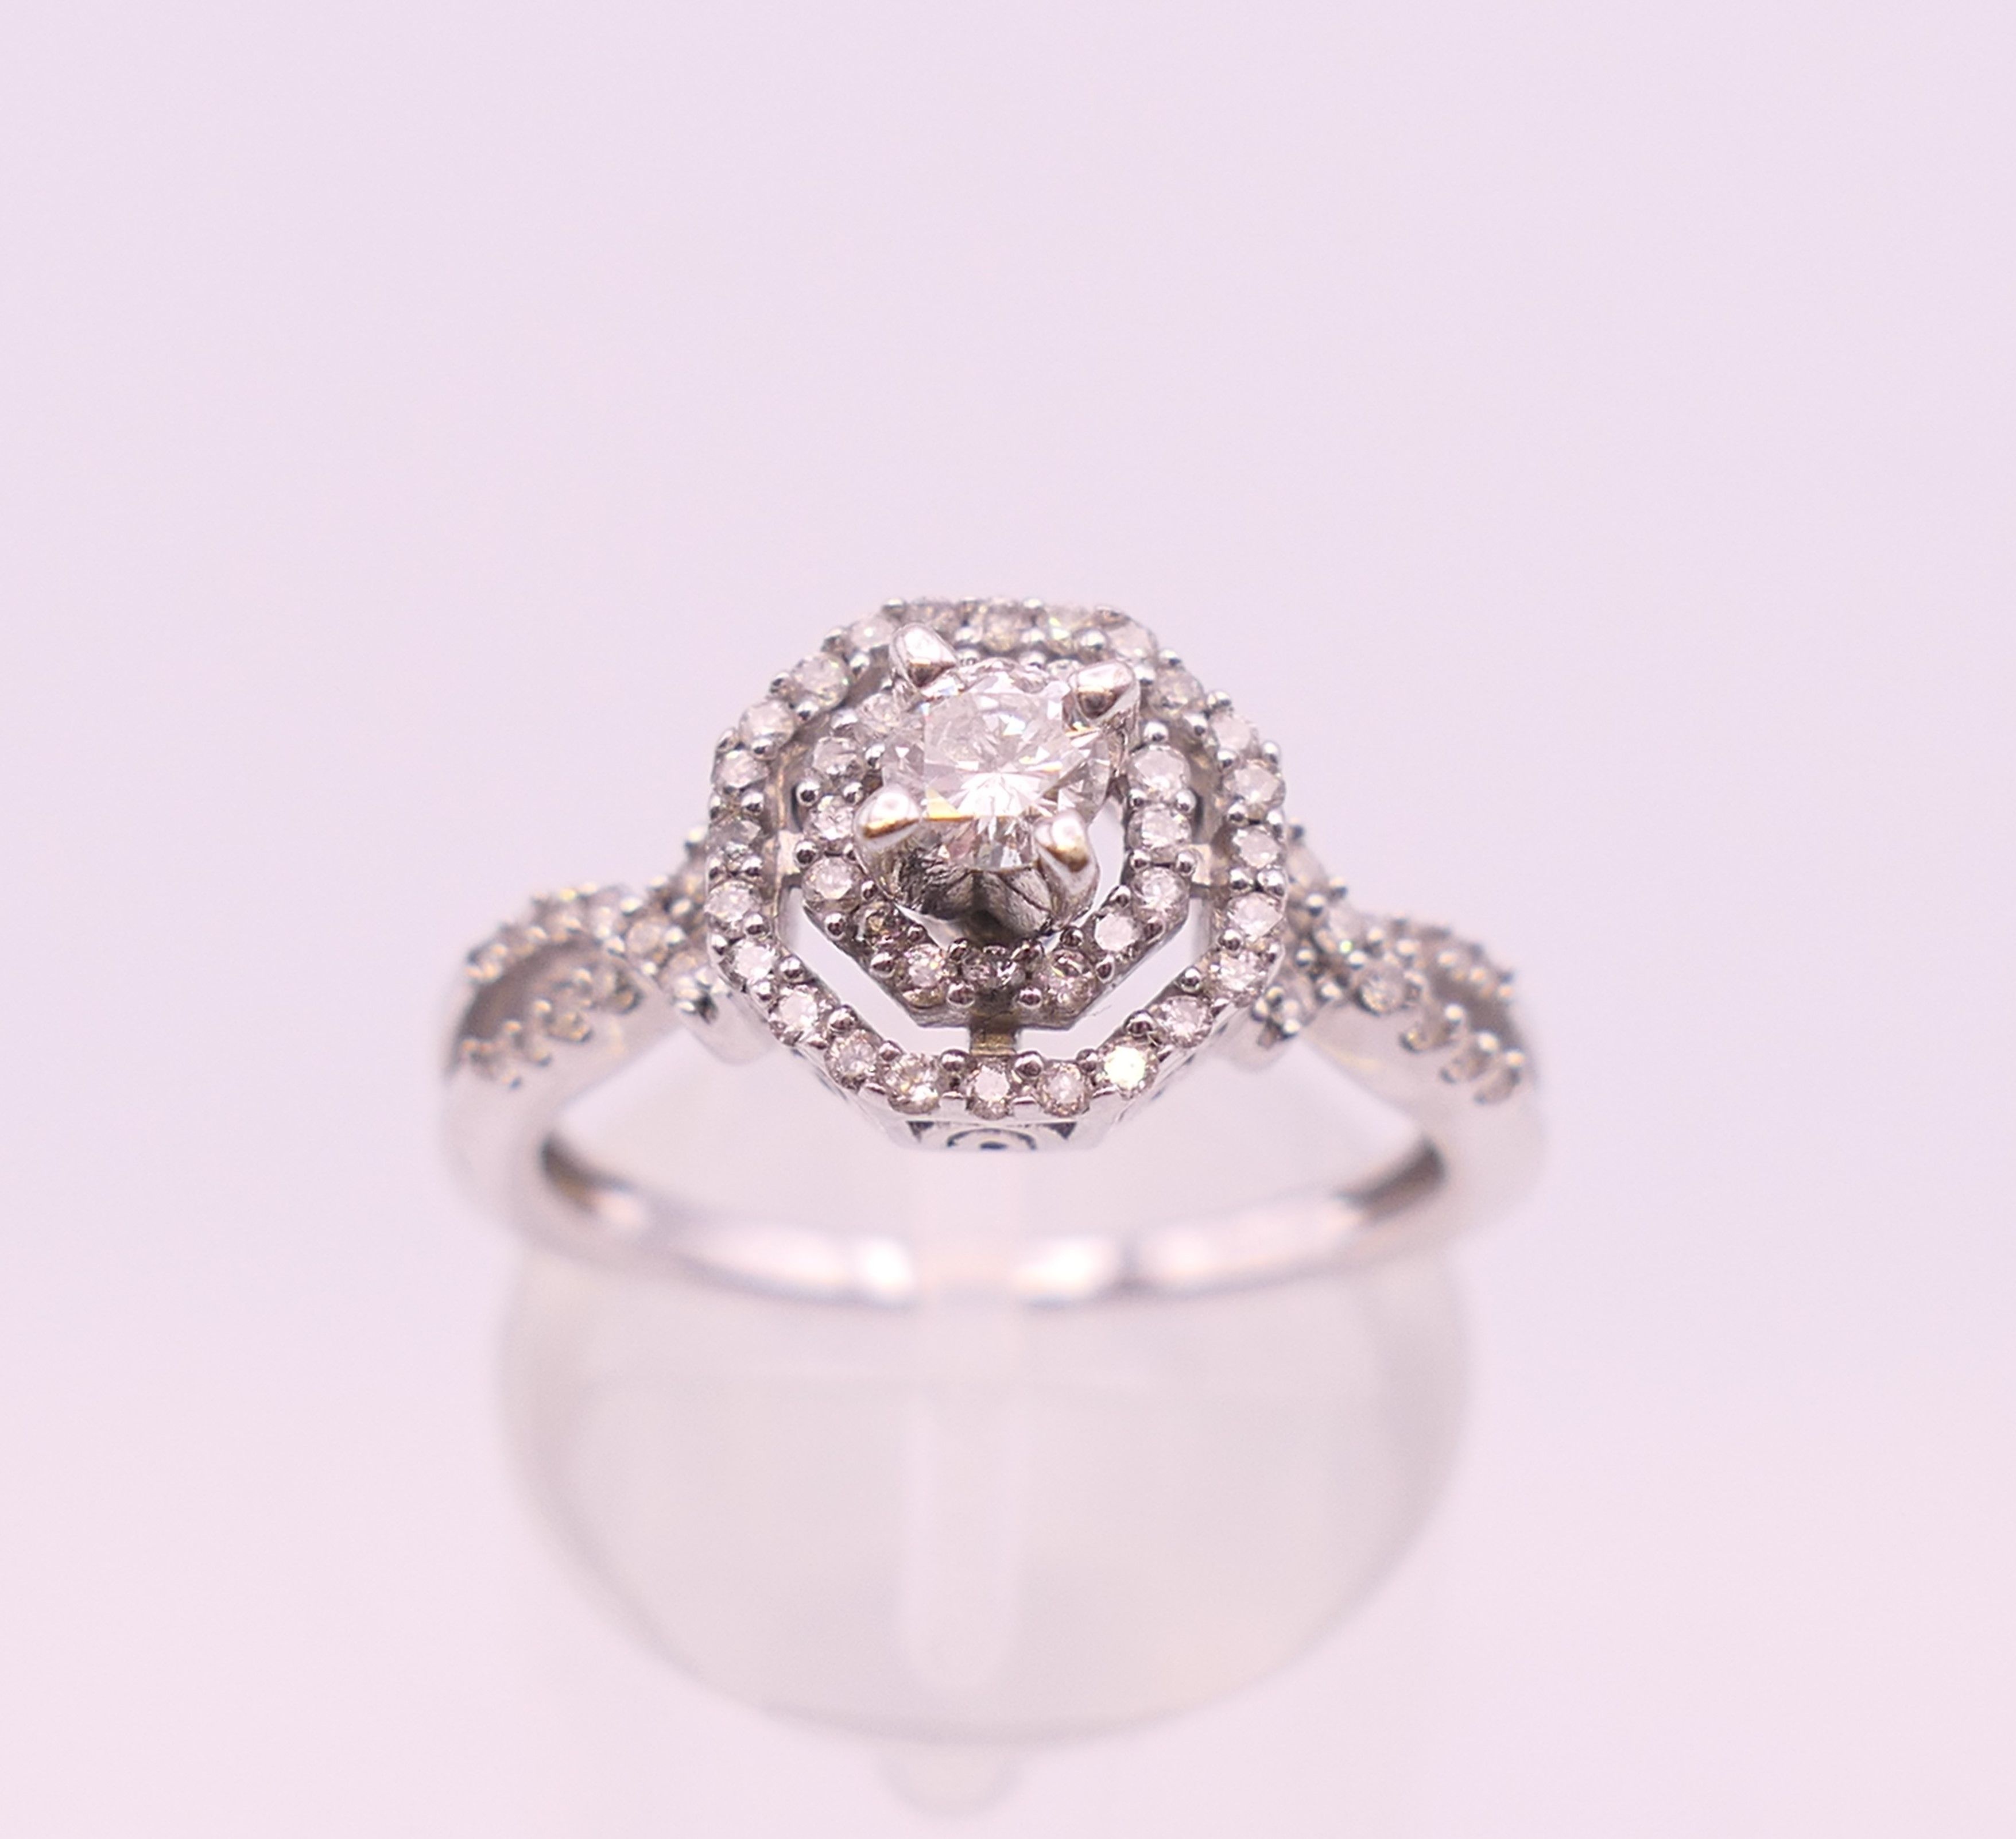 A 14 K white gold diamond ring. Ring size L/M. 3.6 grammes total weight.